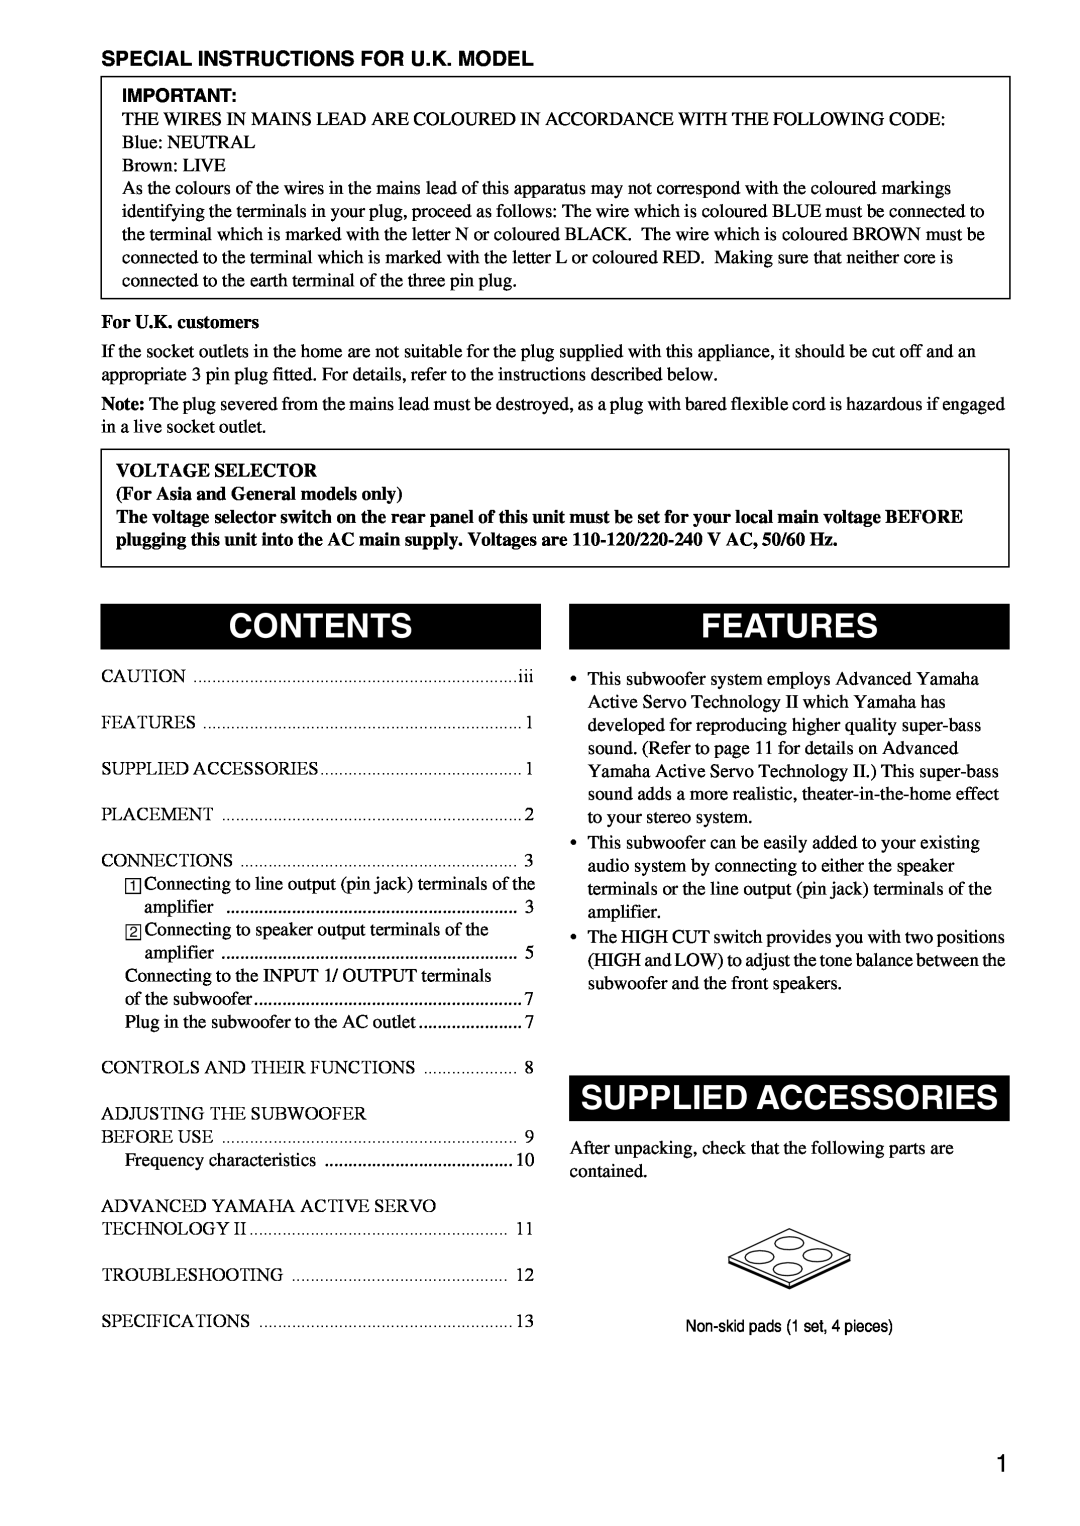 Yamaha YSTSW216BL owner manual Contents, Features, Supplied Accessories, For U.K. customers 